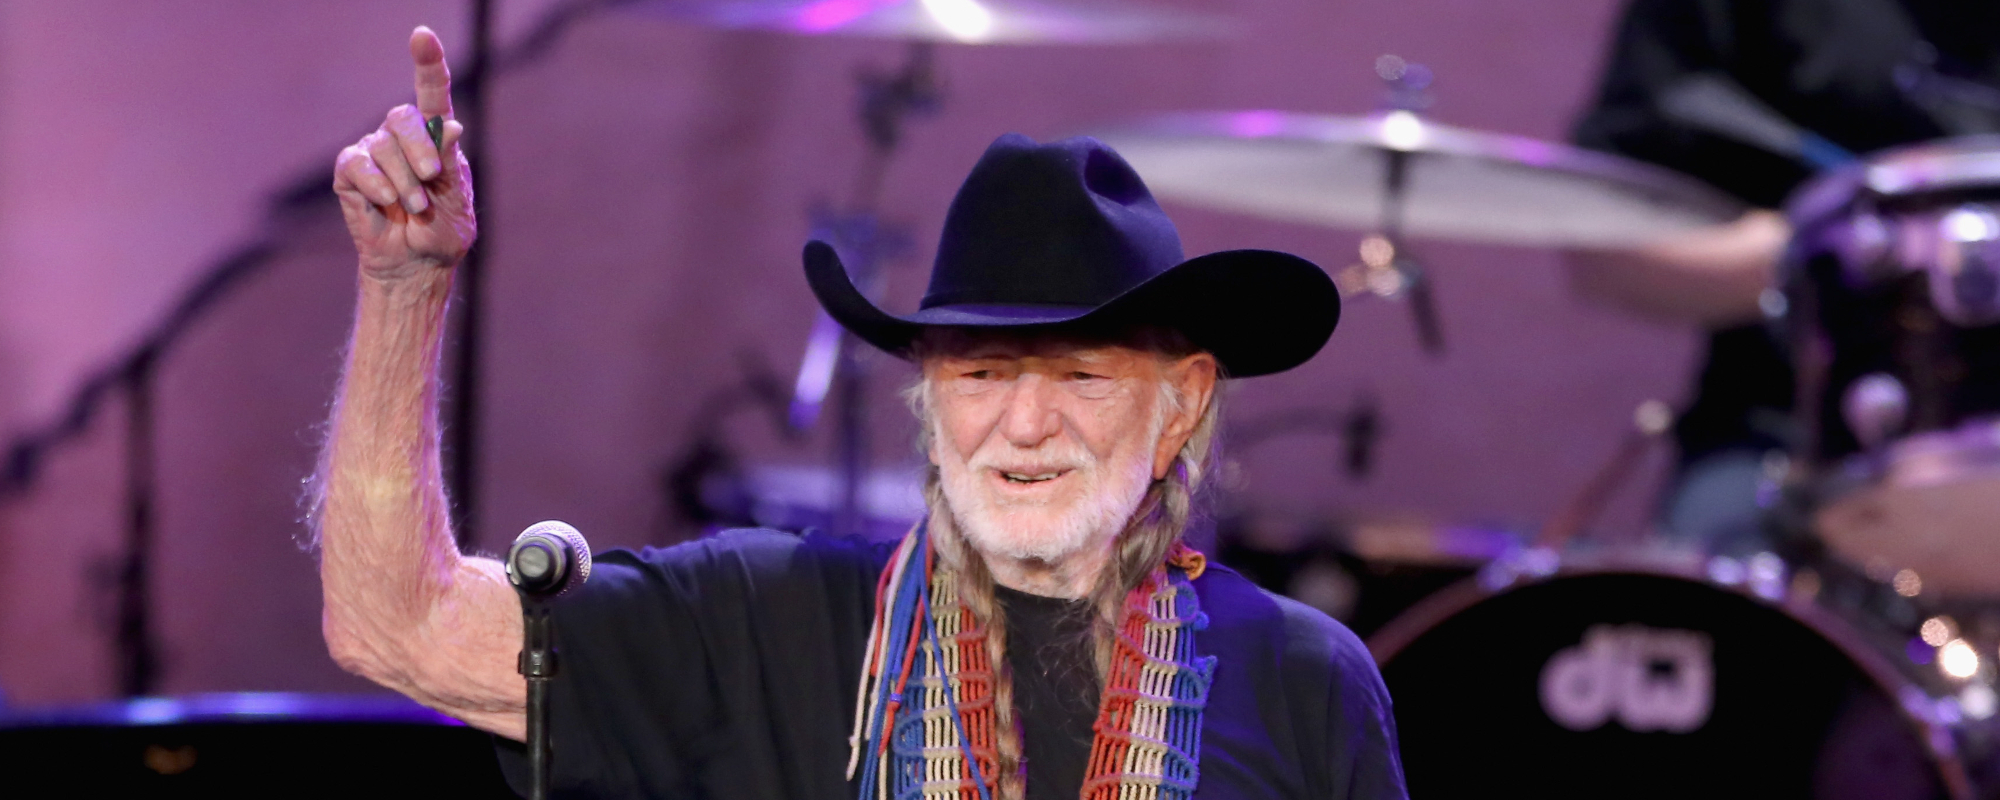 Willie Nelson Juggles Affairs, Attempted Suicide, Alcohol, and More in New Docuseries